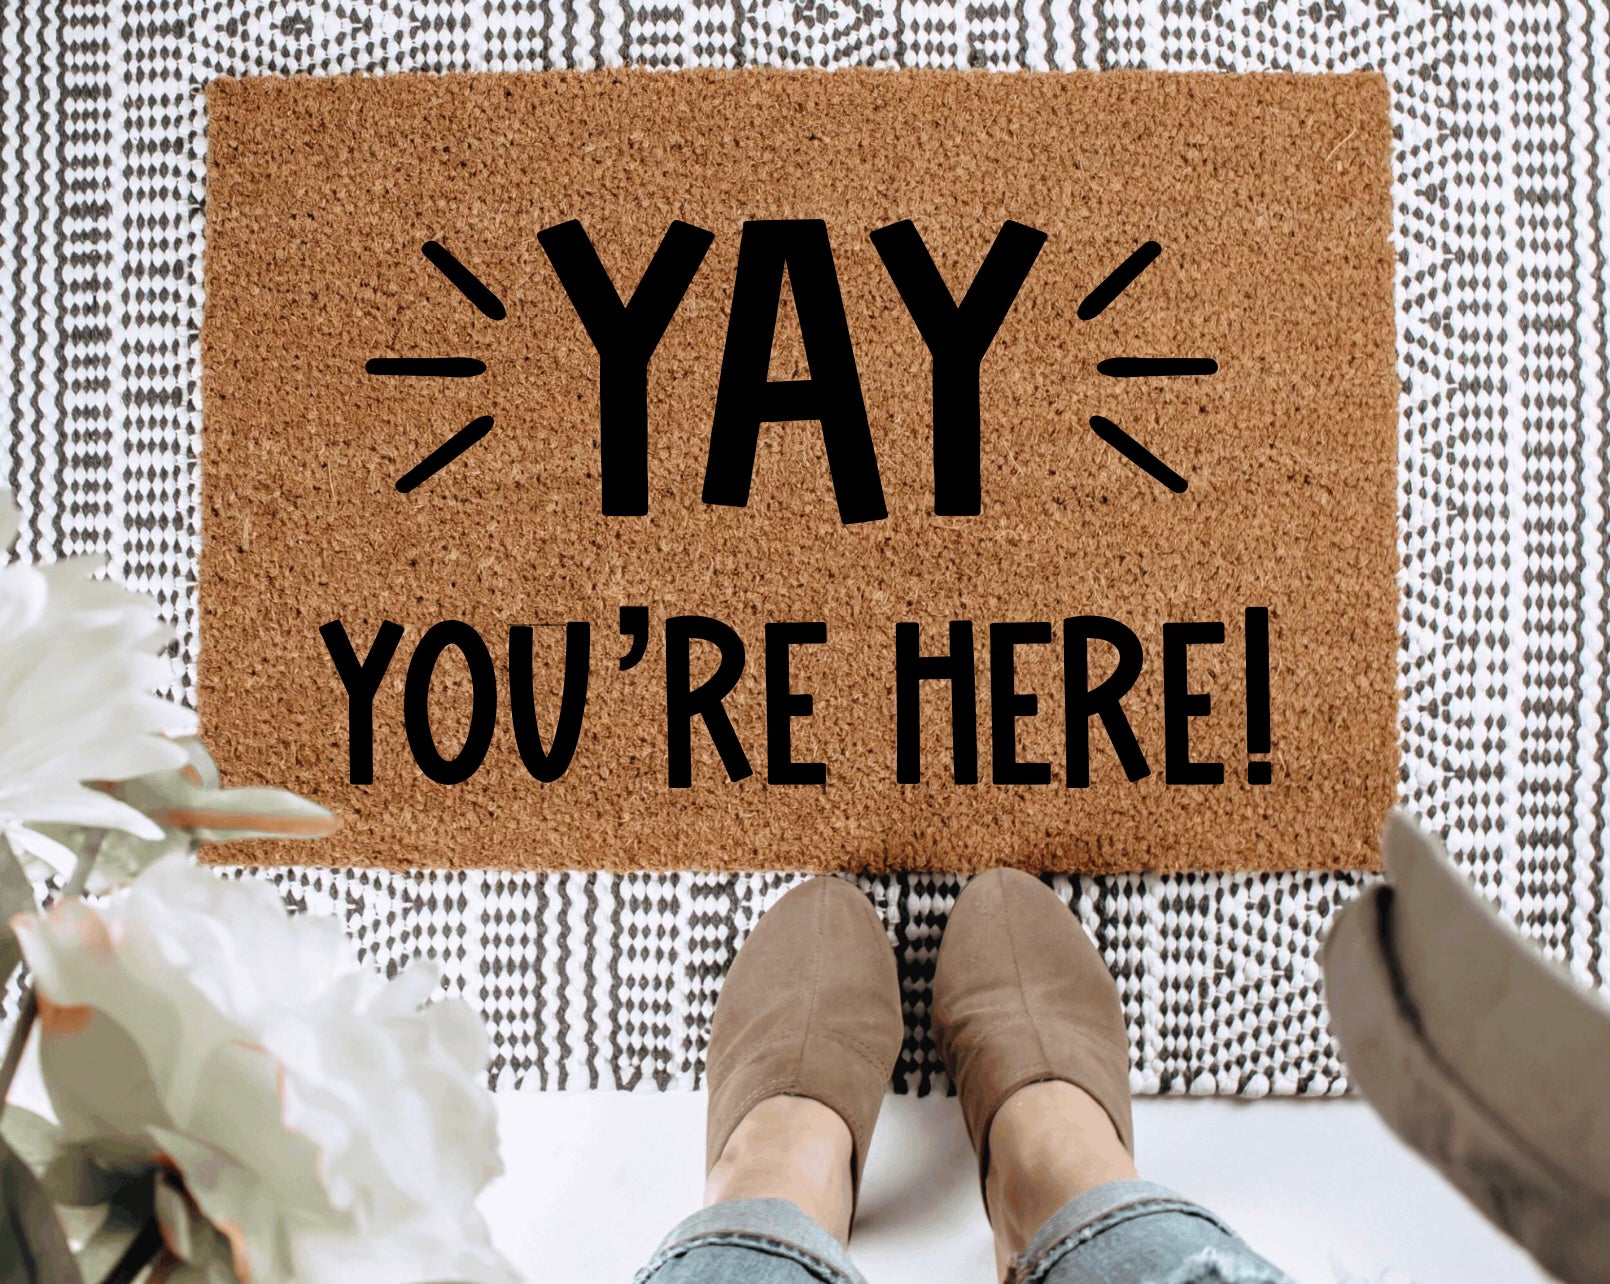 Yay You're Here!